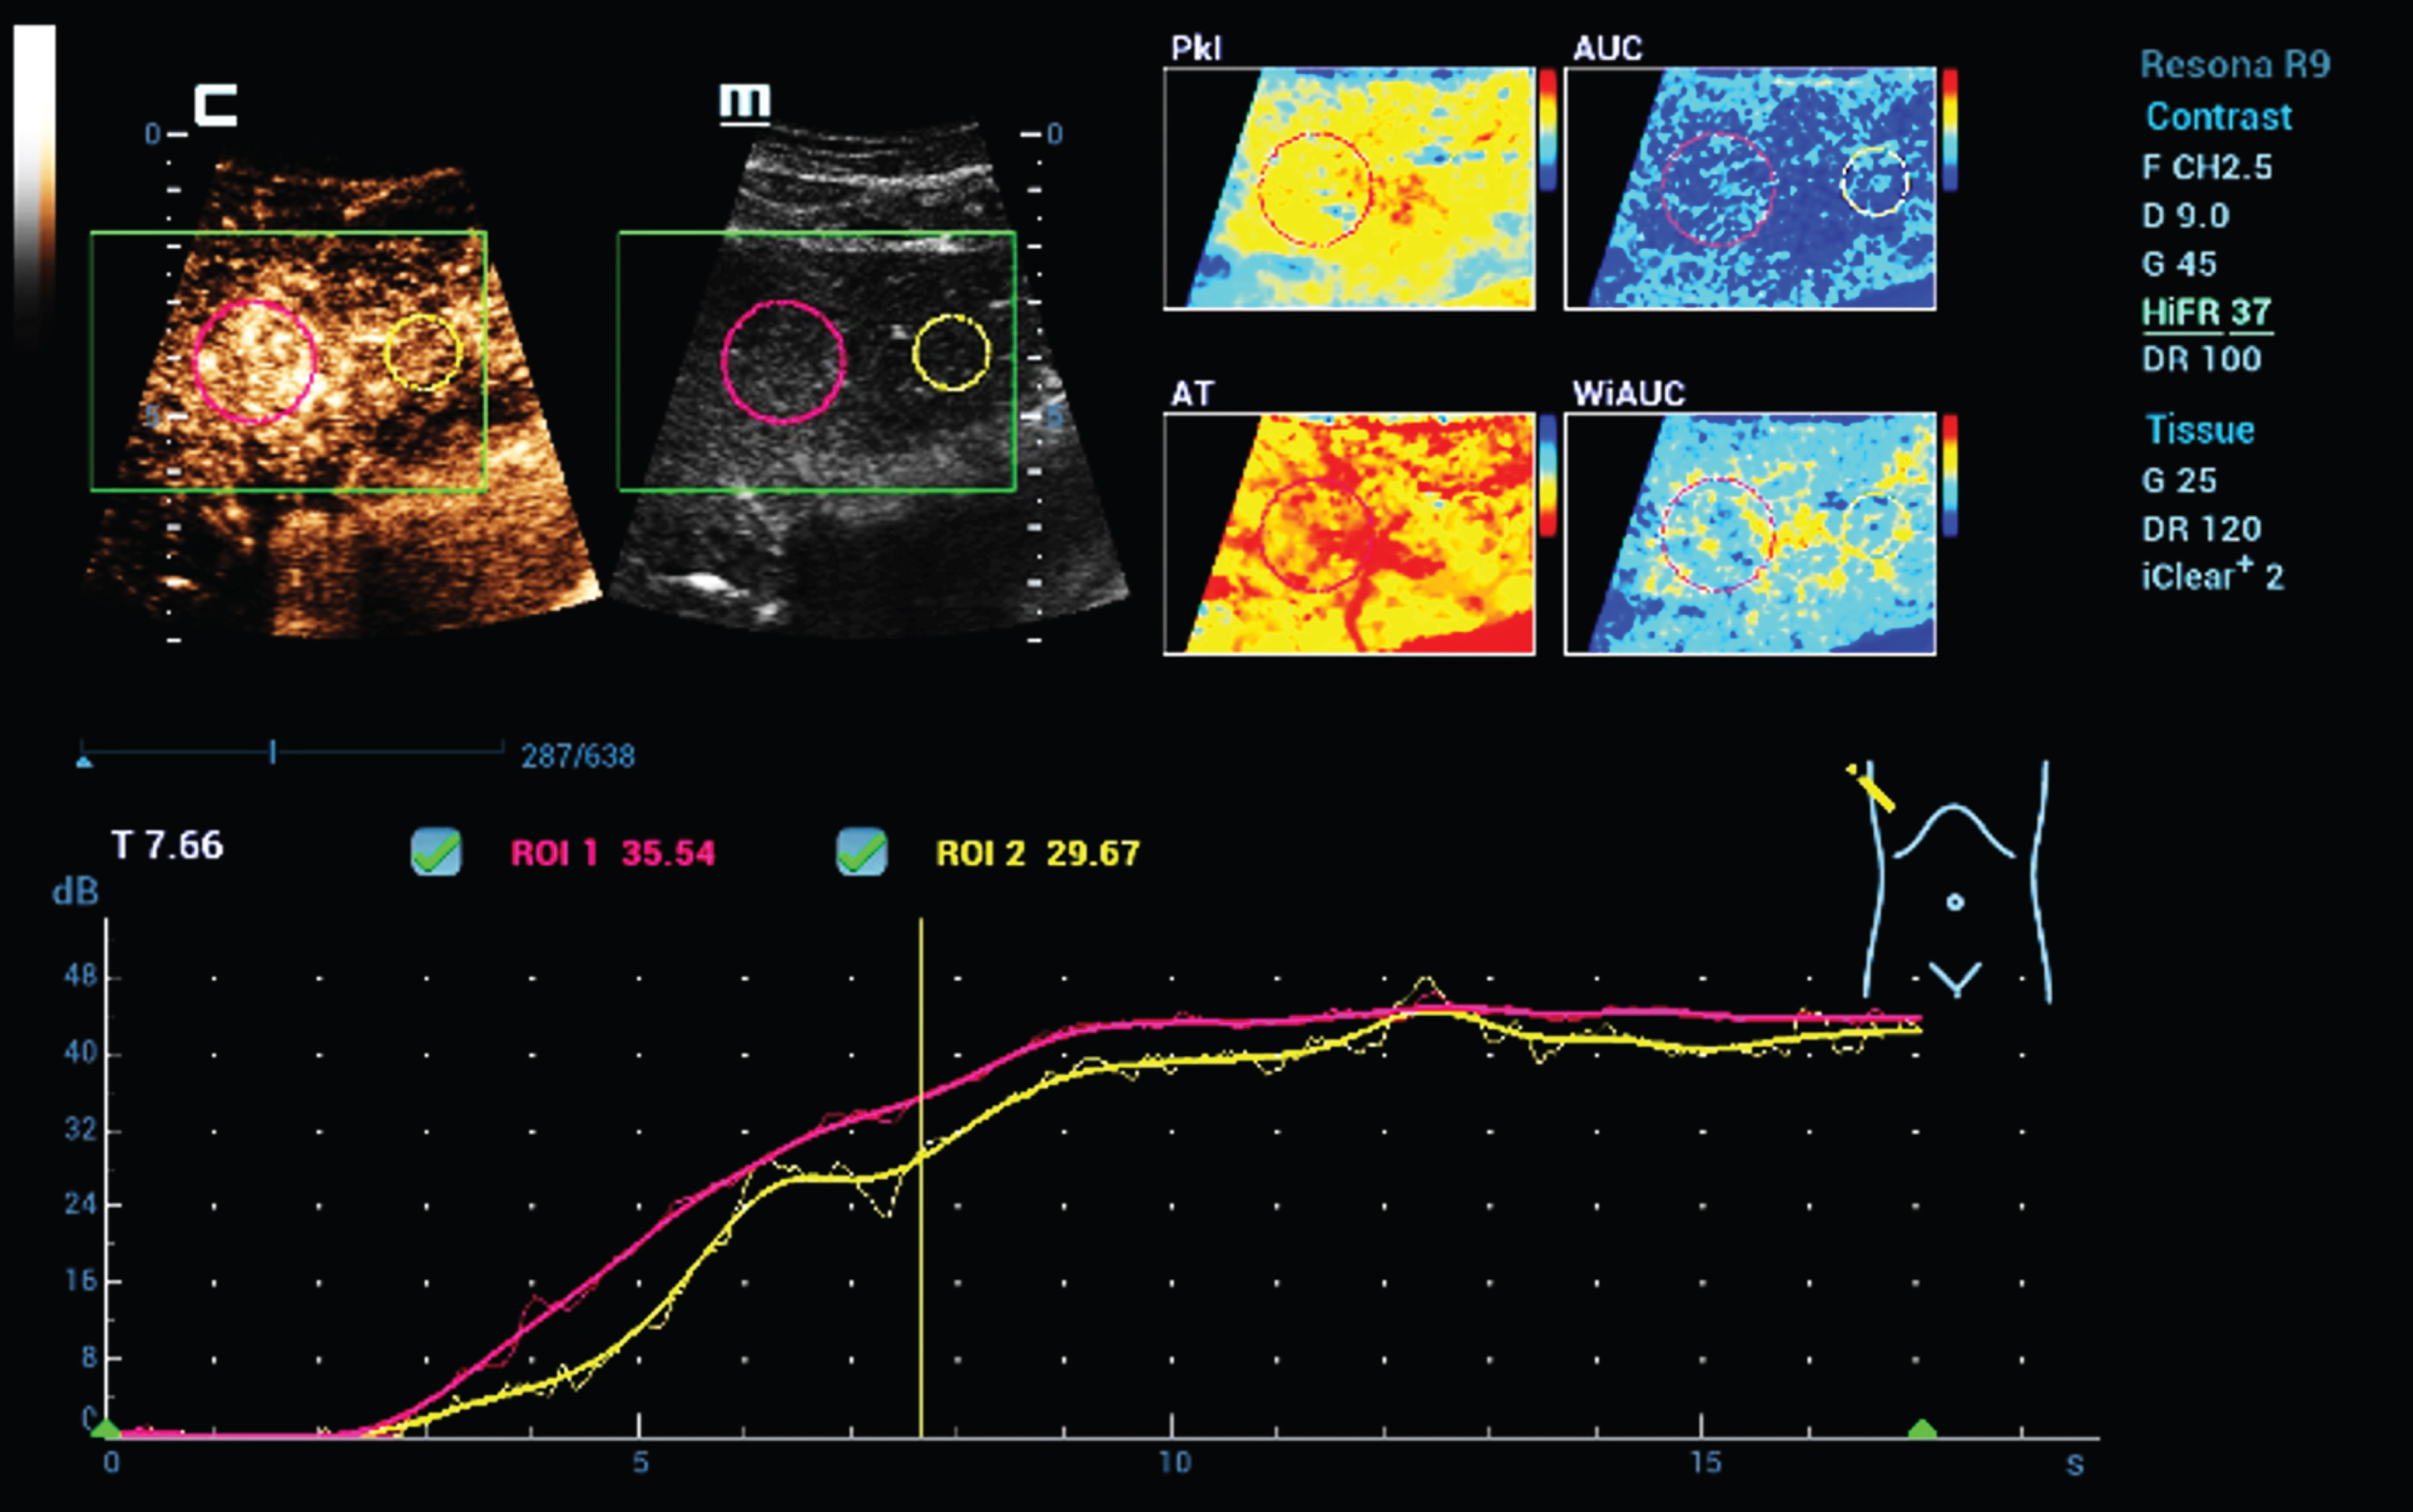 Color coded parametric and time intensity curve analysis (TIC) of dynamic microvascularization of a benign liver lesion using HiFR CEUS. Typical for a focal nodular hyperplasia (FNH) is the continuous enhancement for the center to the margin with than similar contrast like the live tissue. Color maps could visualize different perfusion parameters (AUC, PKI, WiAUC, AT).